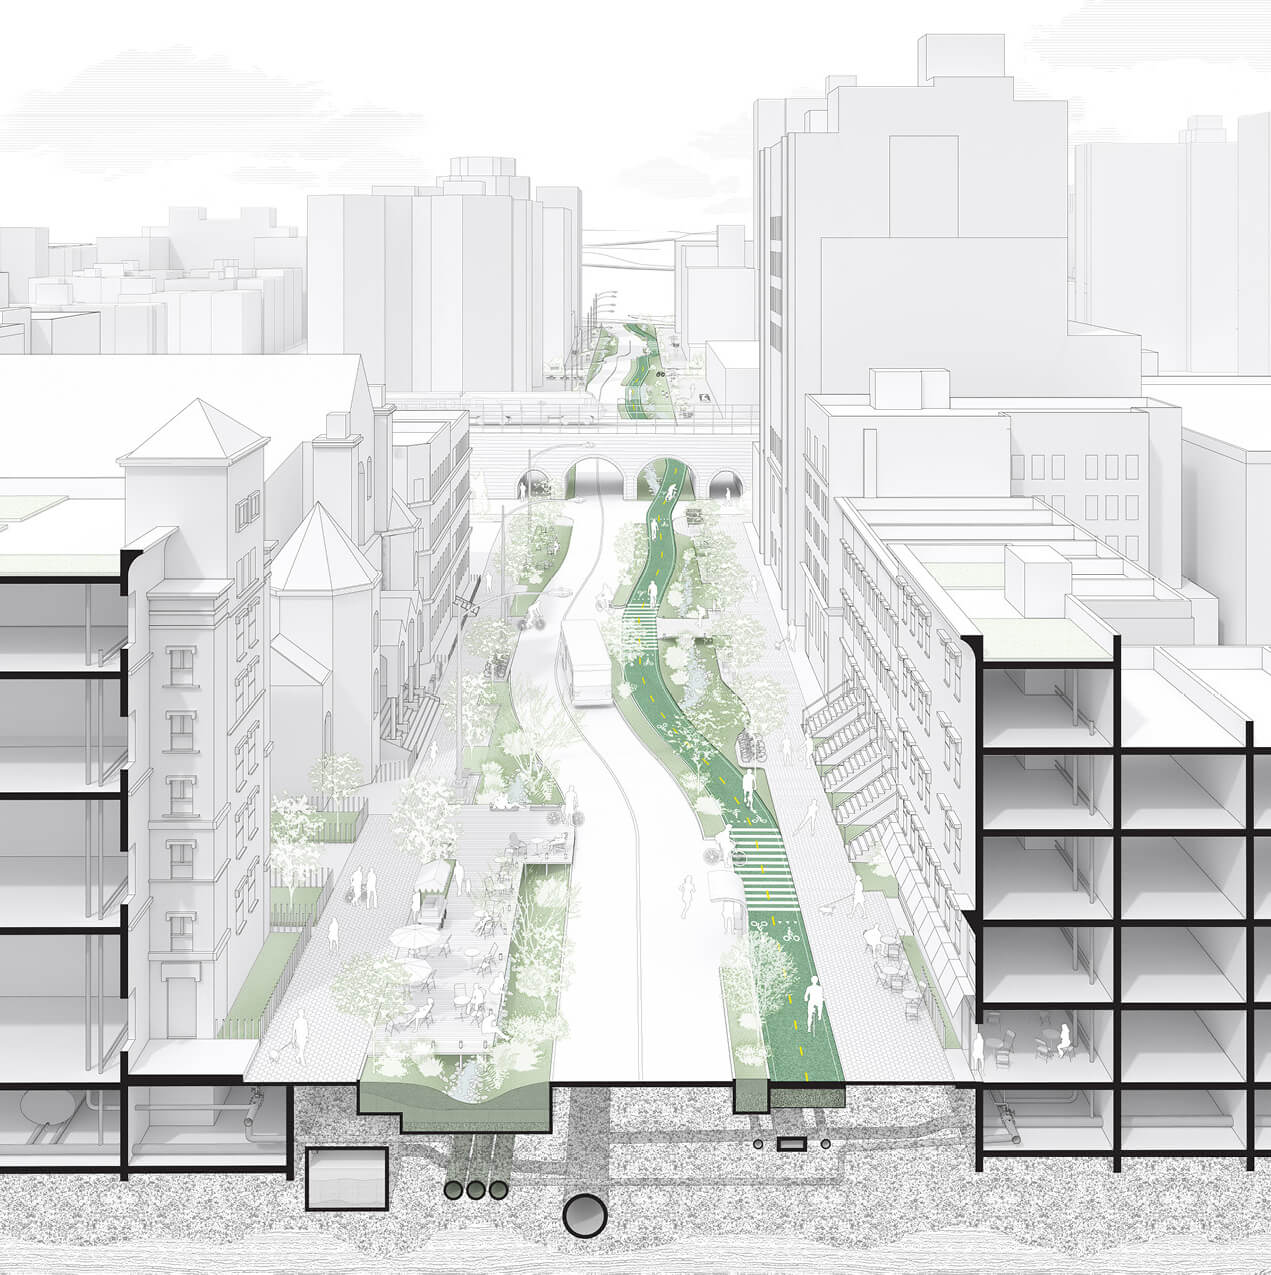 architectural section drawing depicting a city street with a linear greenway down its center